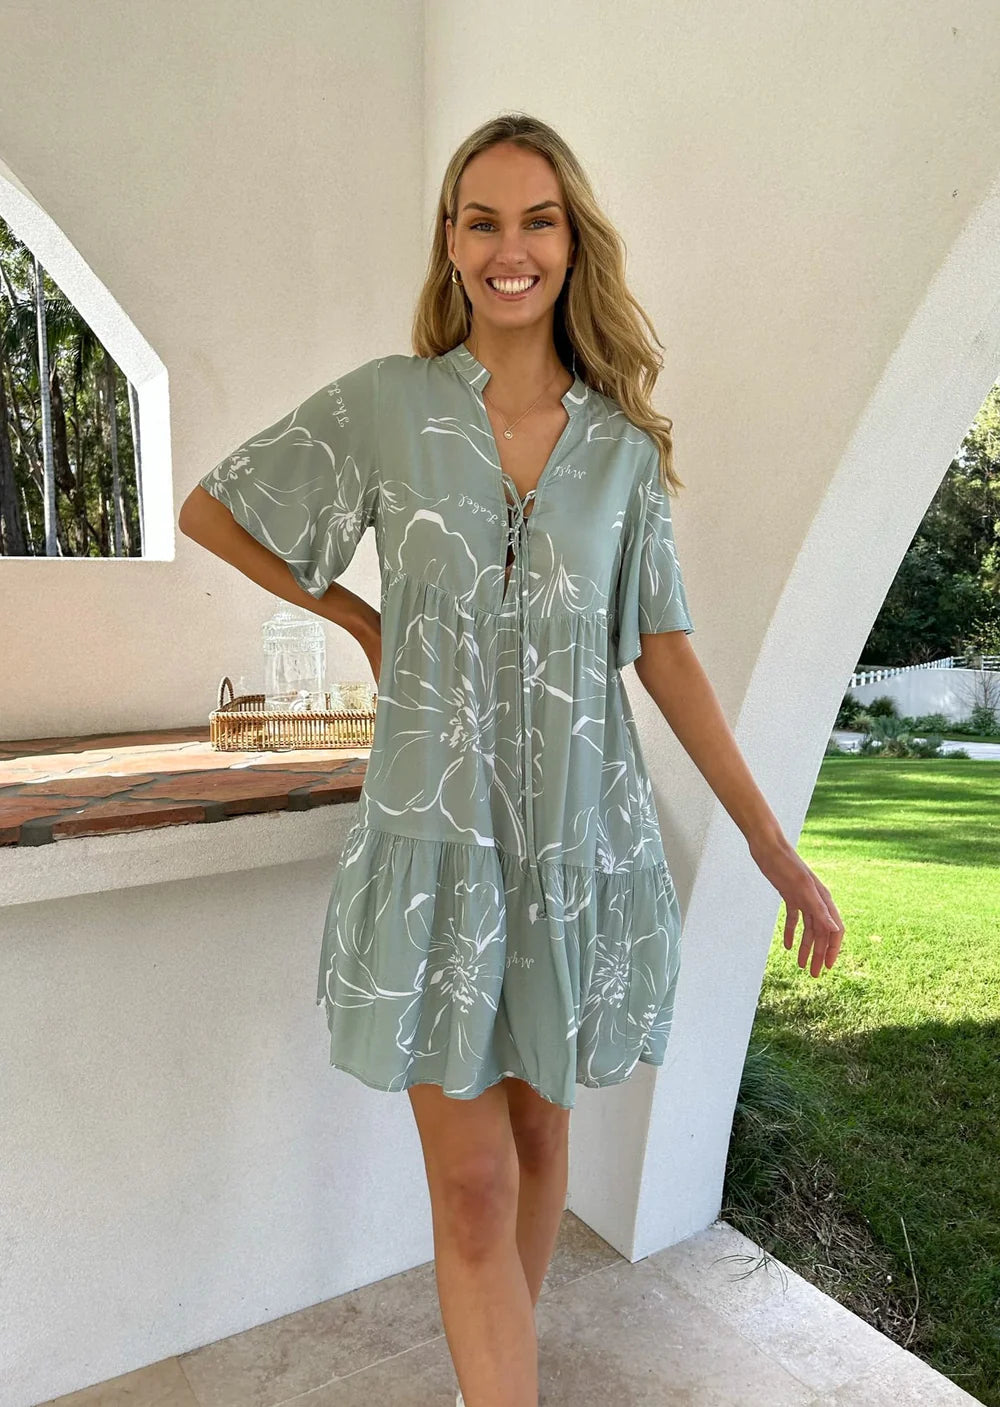 Treat yourself to a regal look with the Arabella Cyprus mini dress. This stylish shift dress features tiered tiers and an adjustable bust for an adjustable fit. Enjoy modern sophistication that looks luxurious and timeless.